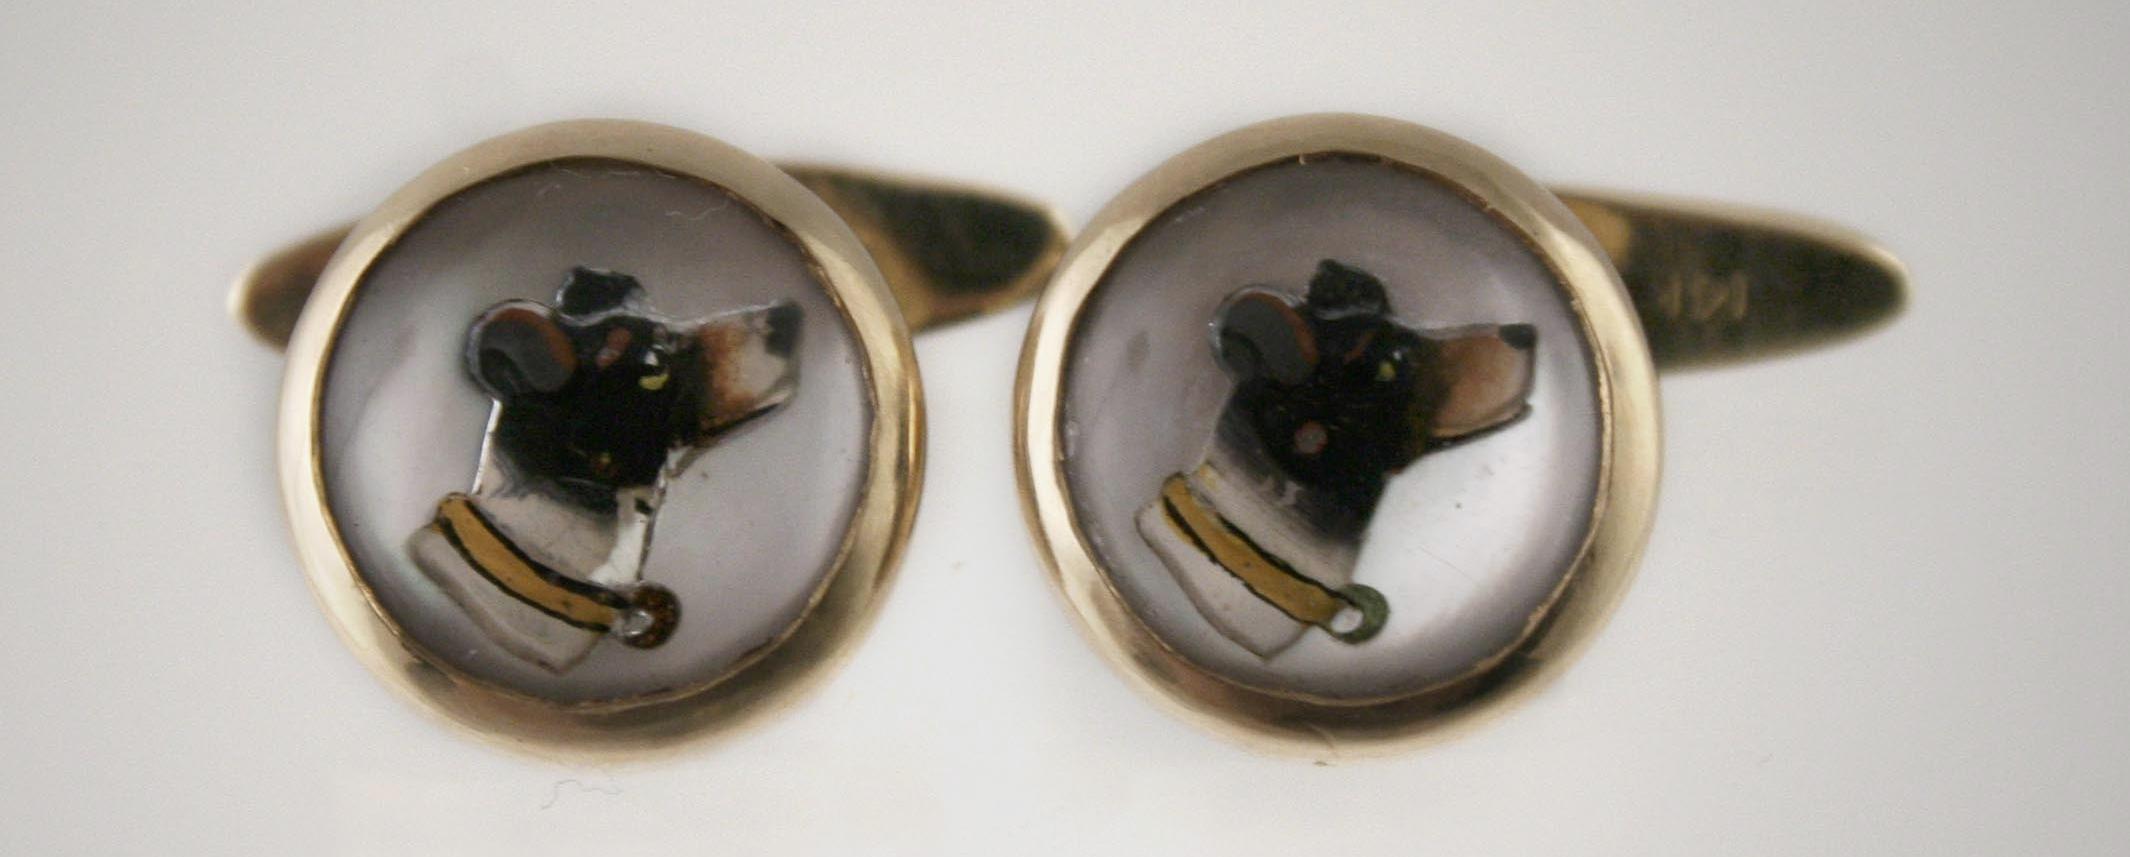 Click to see full size: Jack Russell / Smooth-haired Fox Terrier pressed class cufflinks